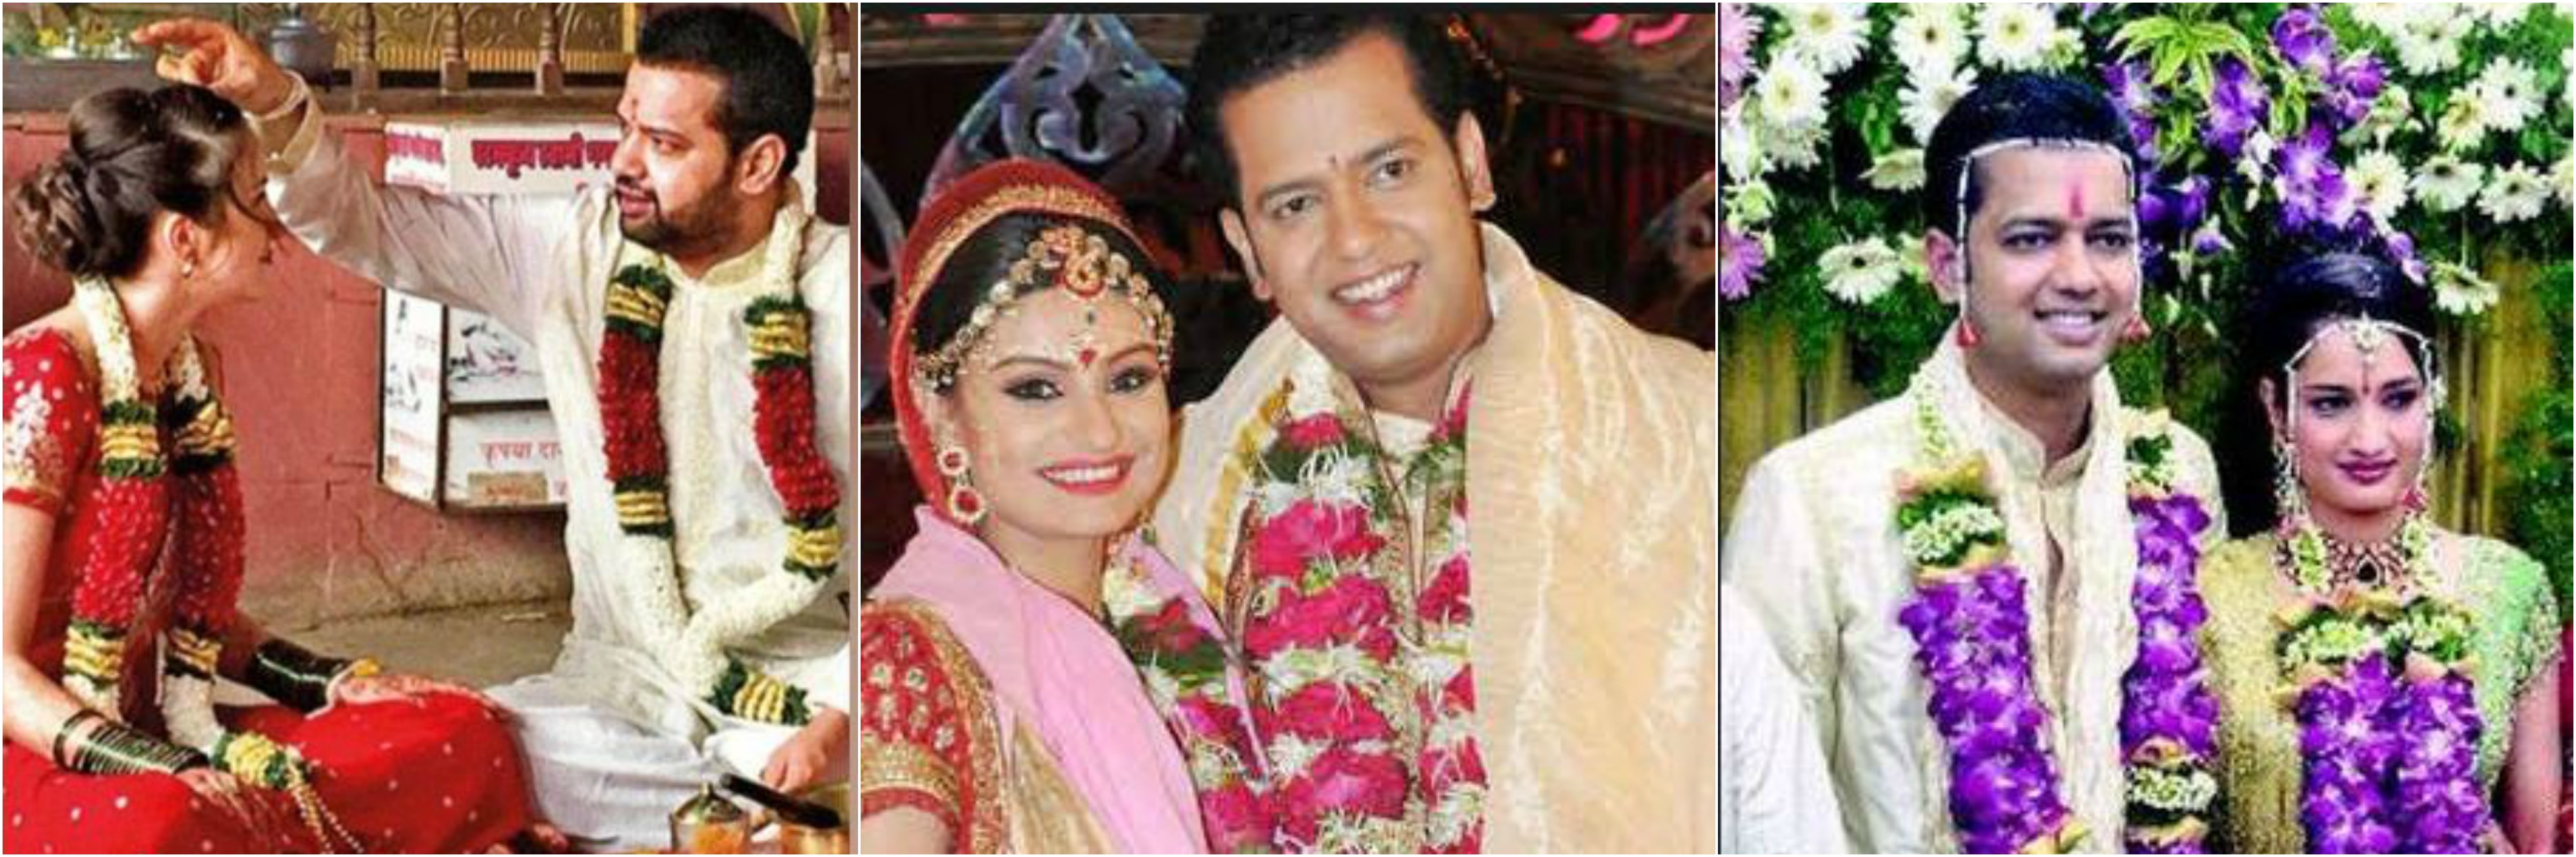 Find Out All The Details about Rahul Mahajan's Third Marriage